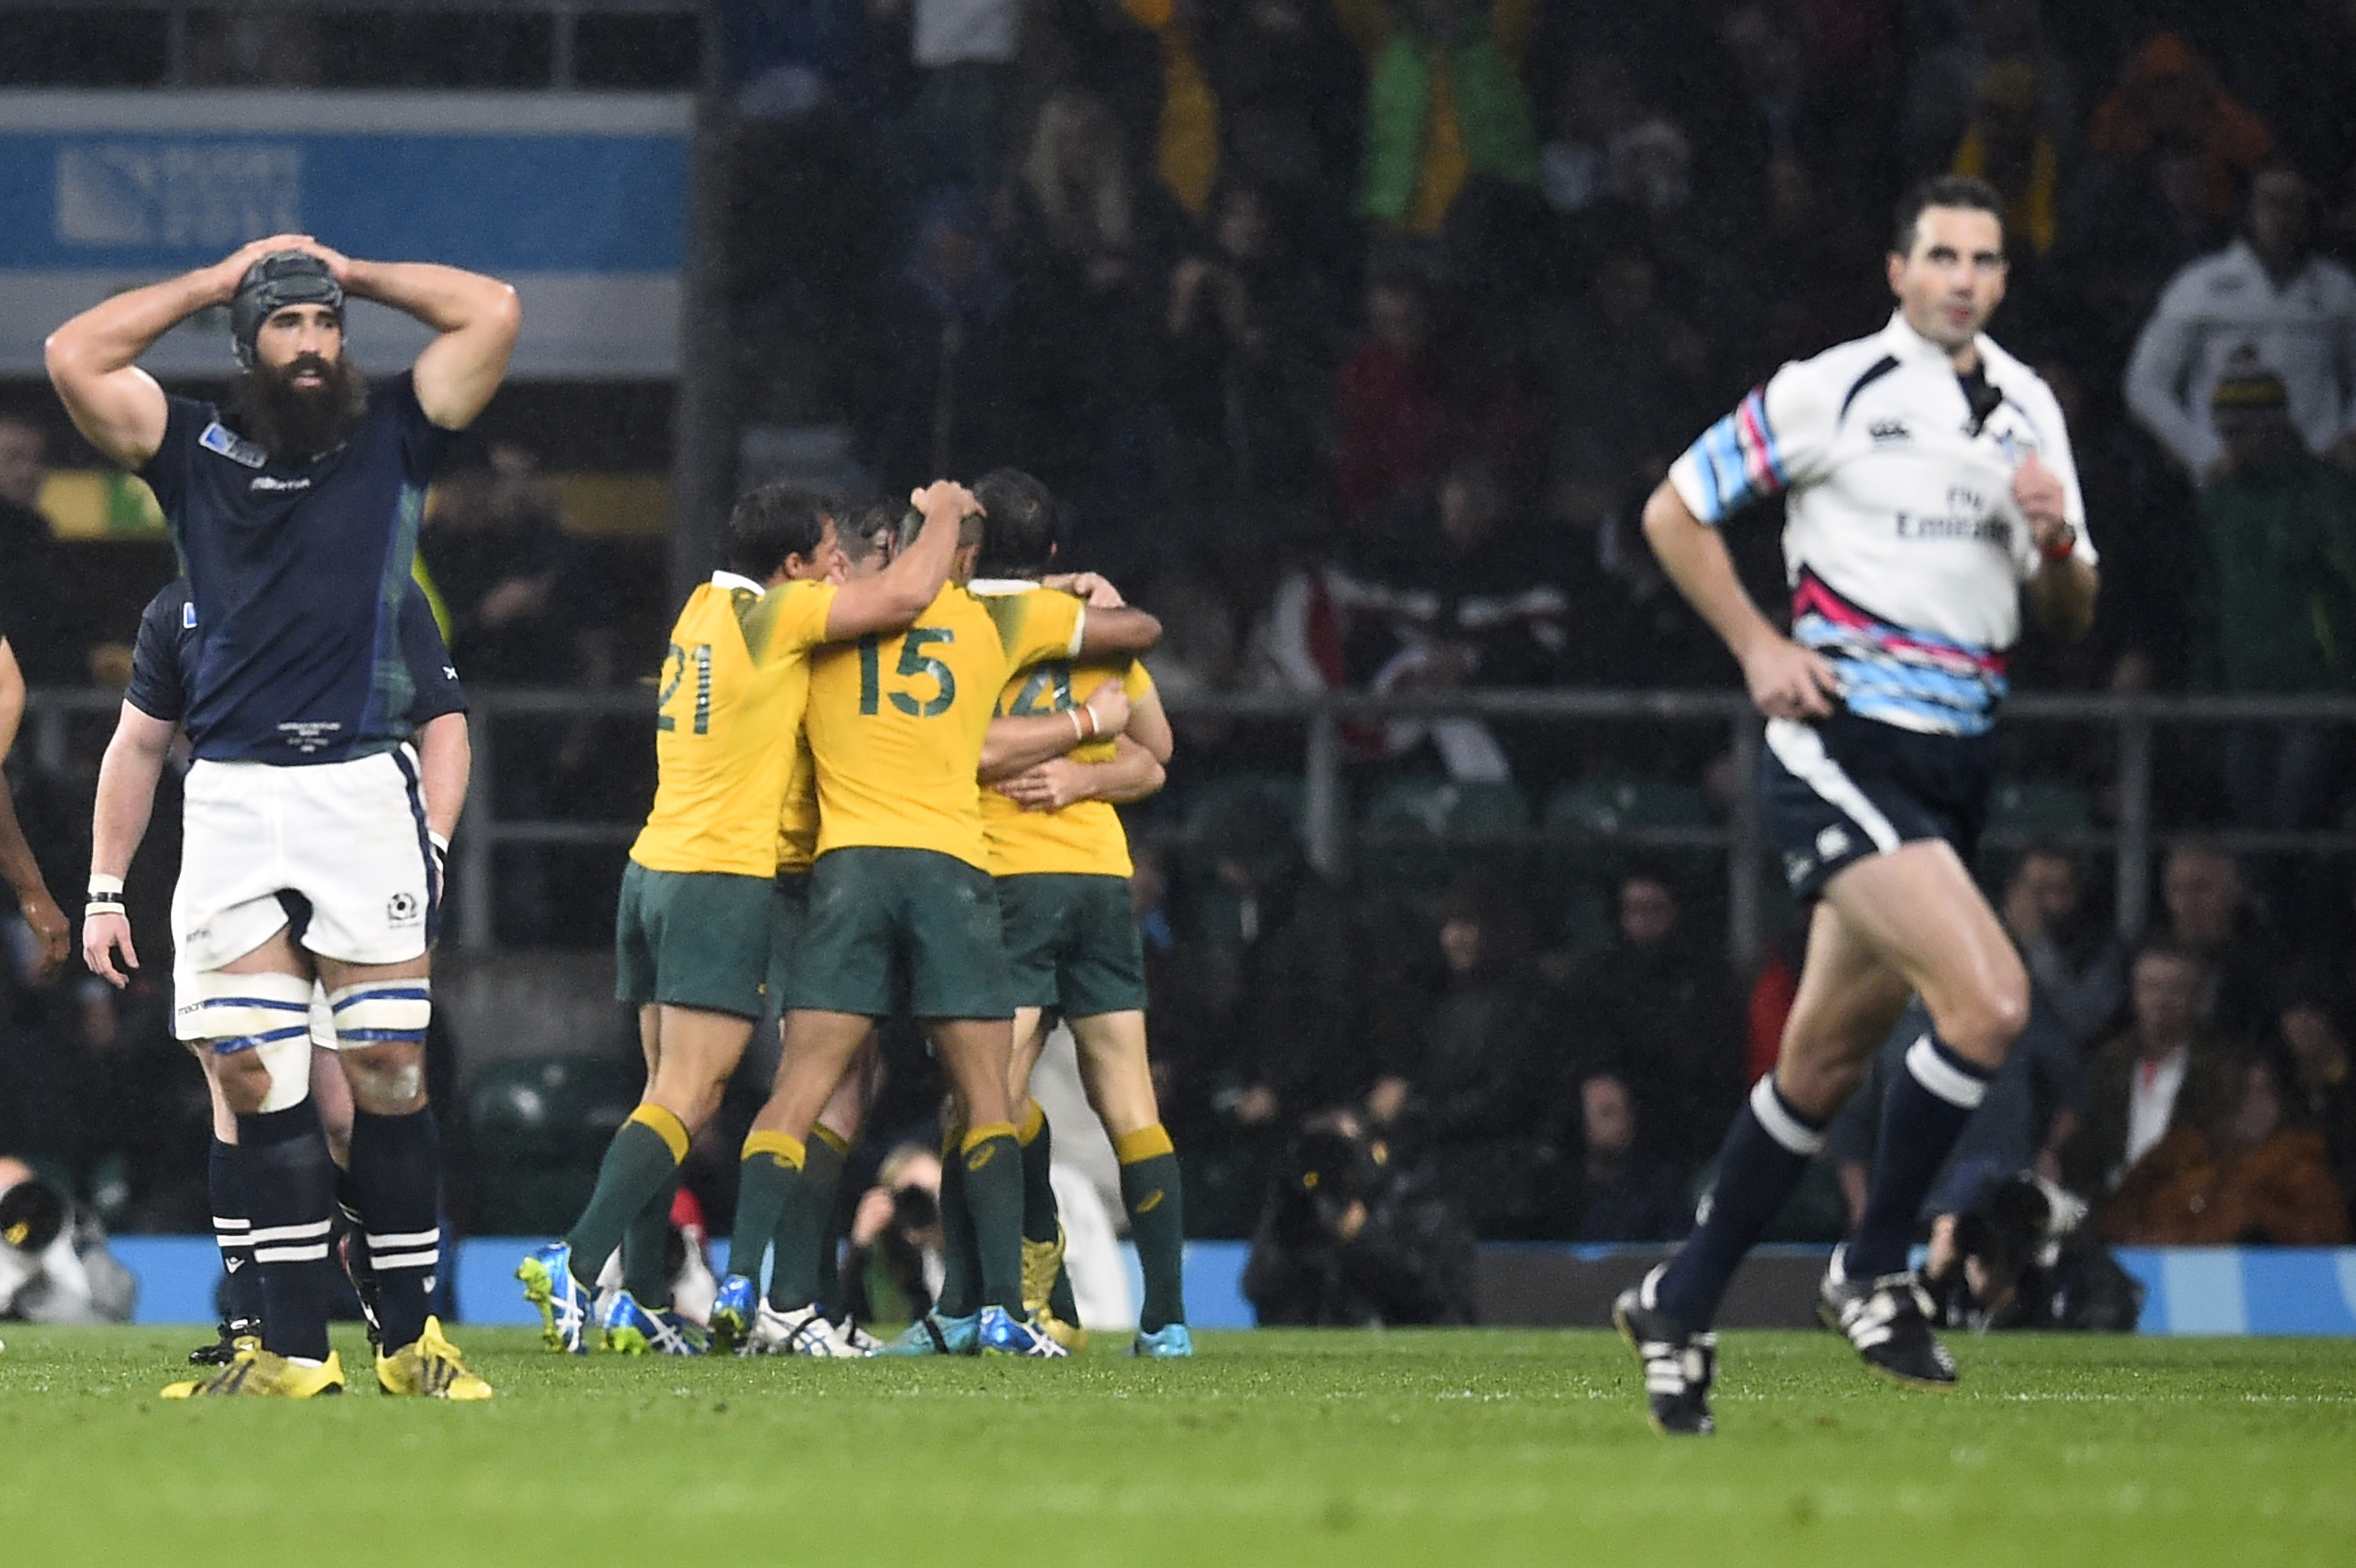 Rugby Union - Australia v Scotland - IRB Rugby World Cup 2015 Quarter Final - Twickenham Stadium, London, England - 18/10/15 Australia players celebrate their win as Referee Craig Joubert (R) leaves the field at the end of the game Reuters / Dylan Martinez Livepic